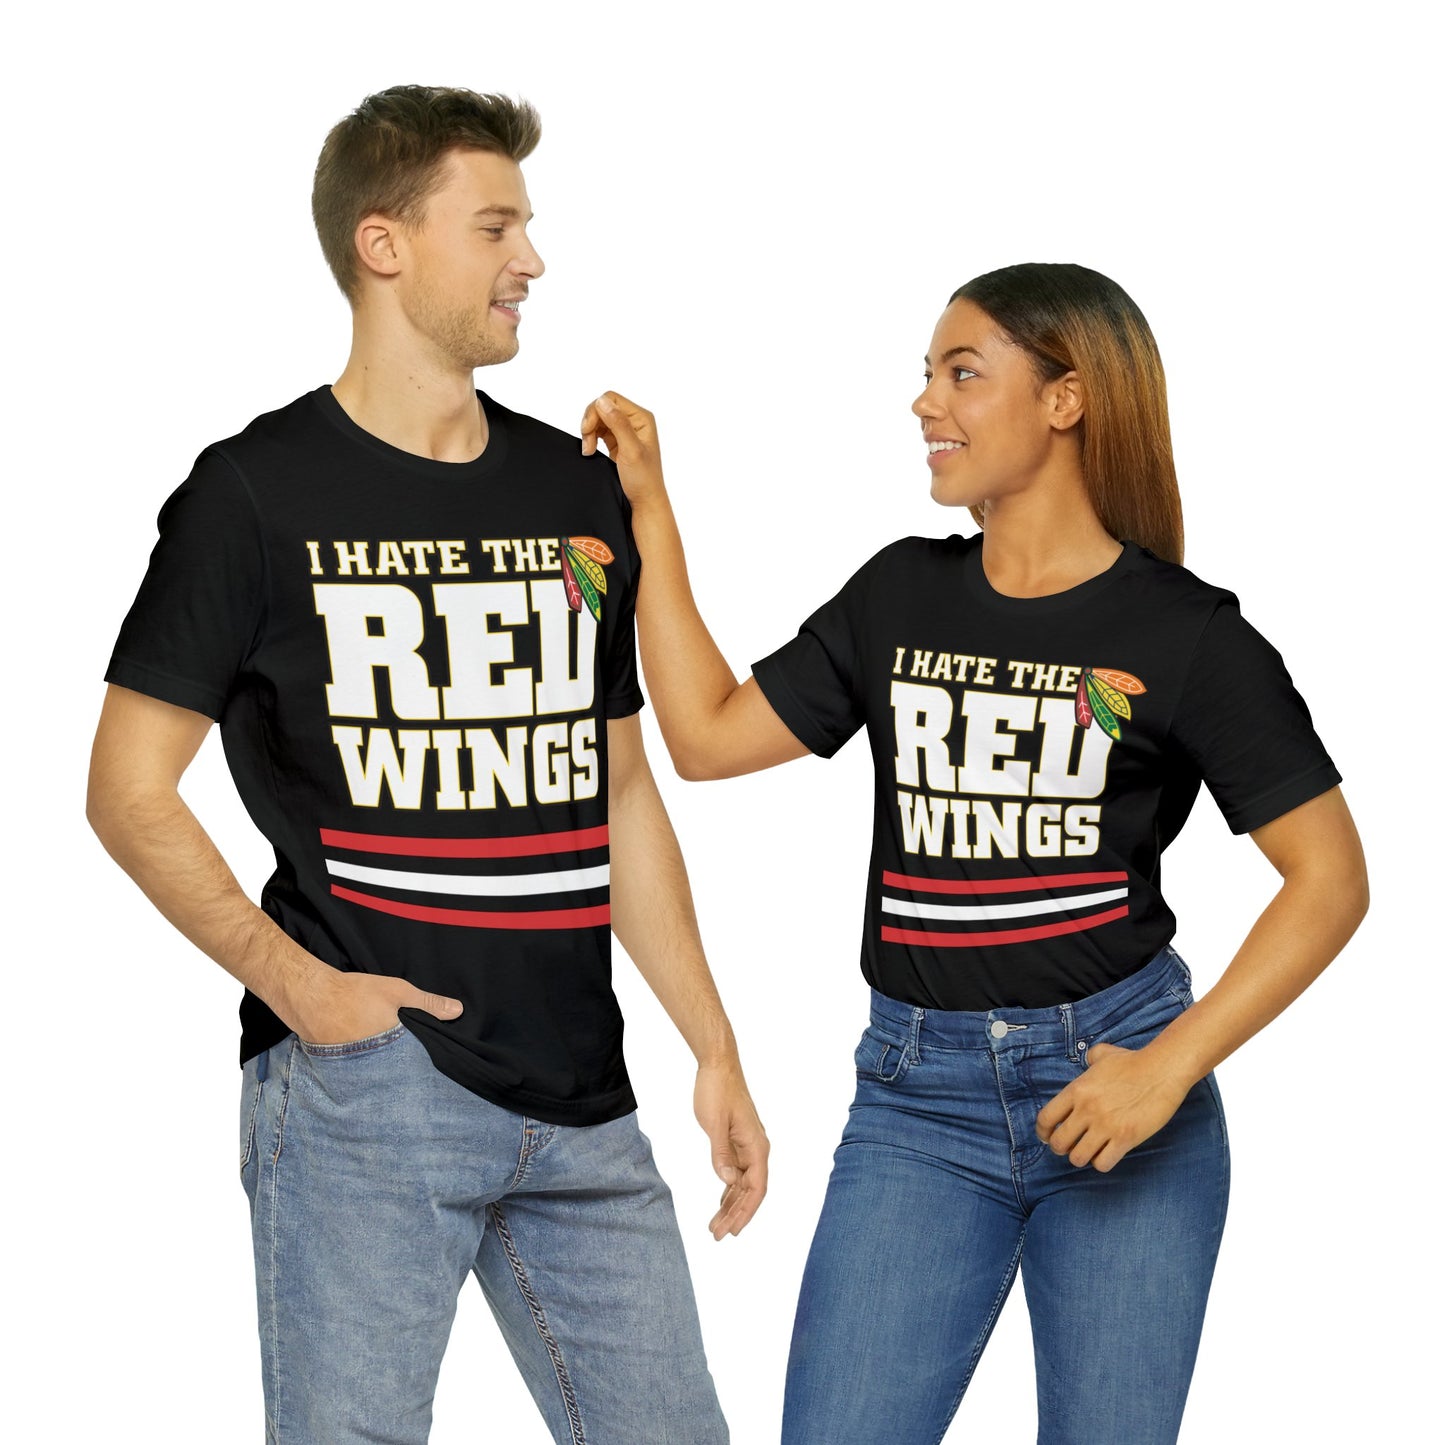 I Hate That Motor City Red Winged Team (Chicago Fan) - Unisex Jersey Short Sleeve Tee